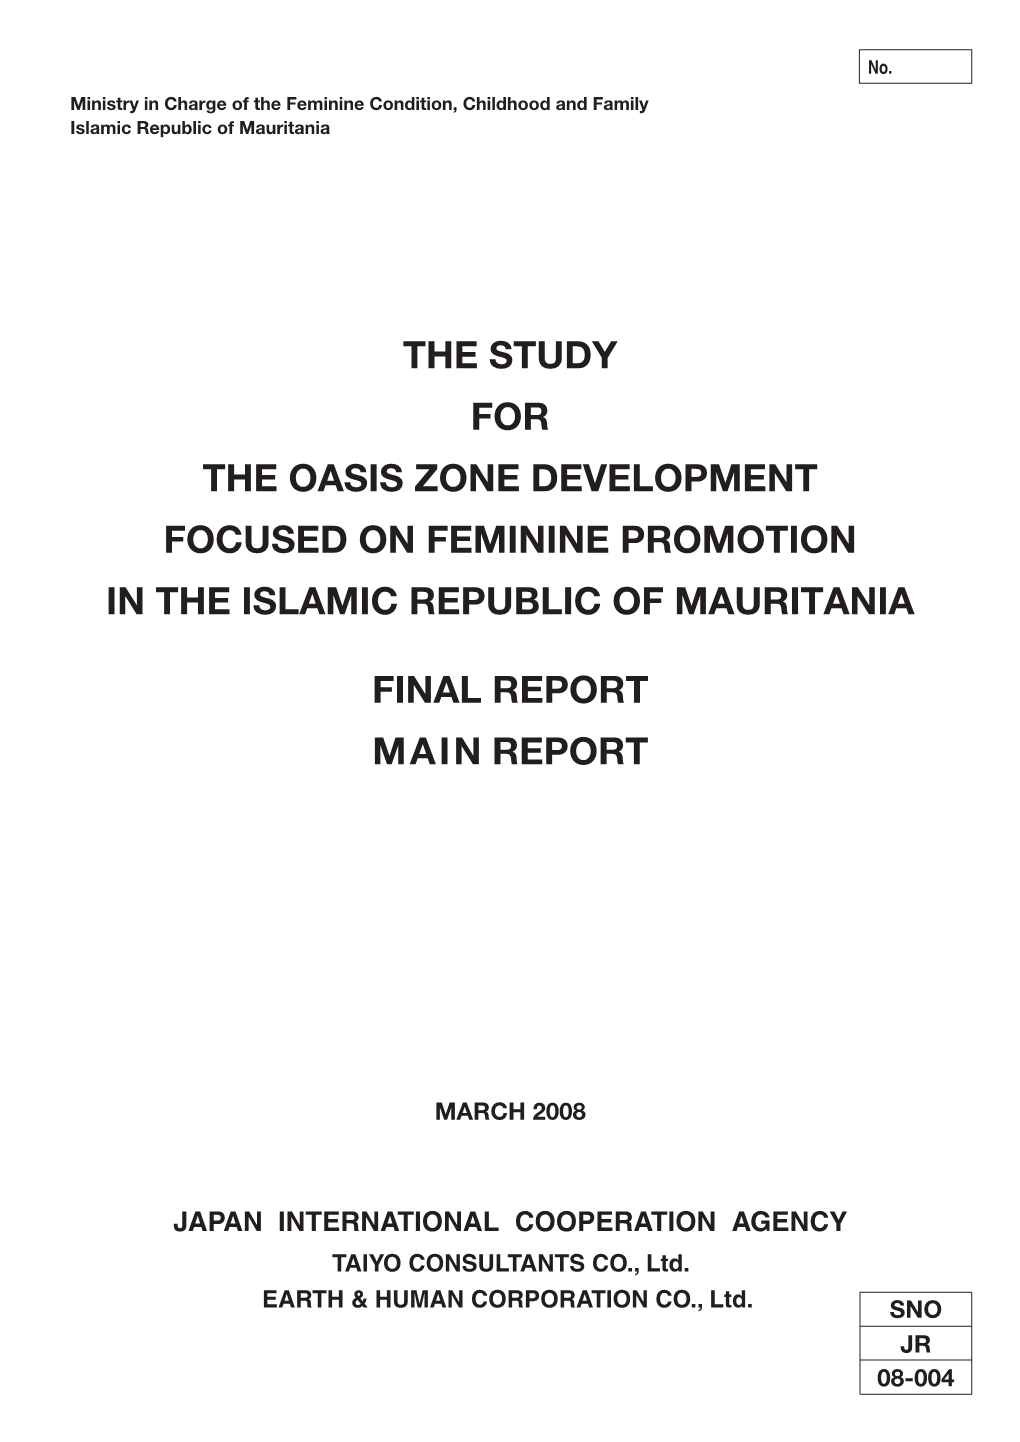 The Study for the Oasis Zone Development Focused on Feminine Promotion in the Islamic Republic of Mauritania